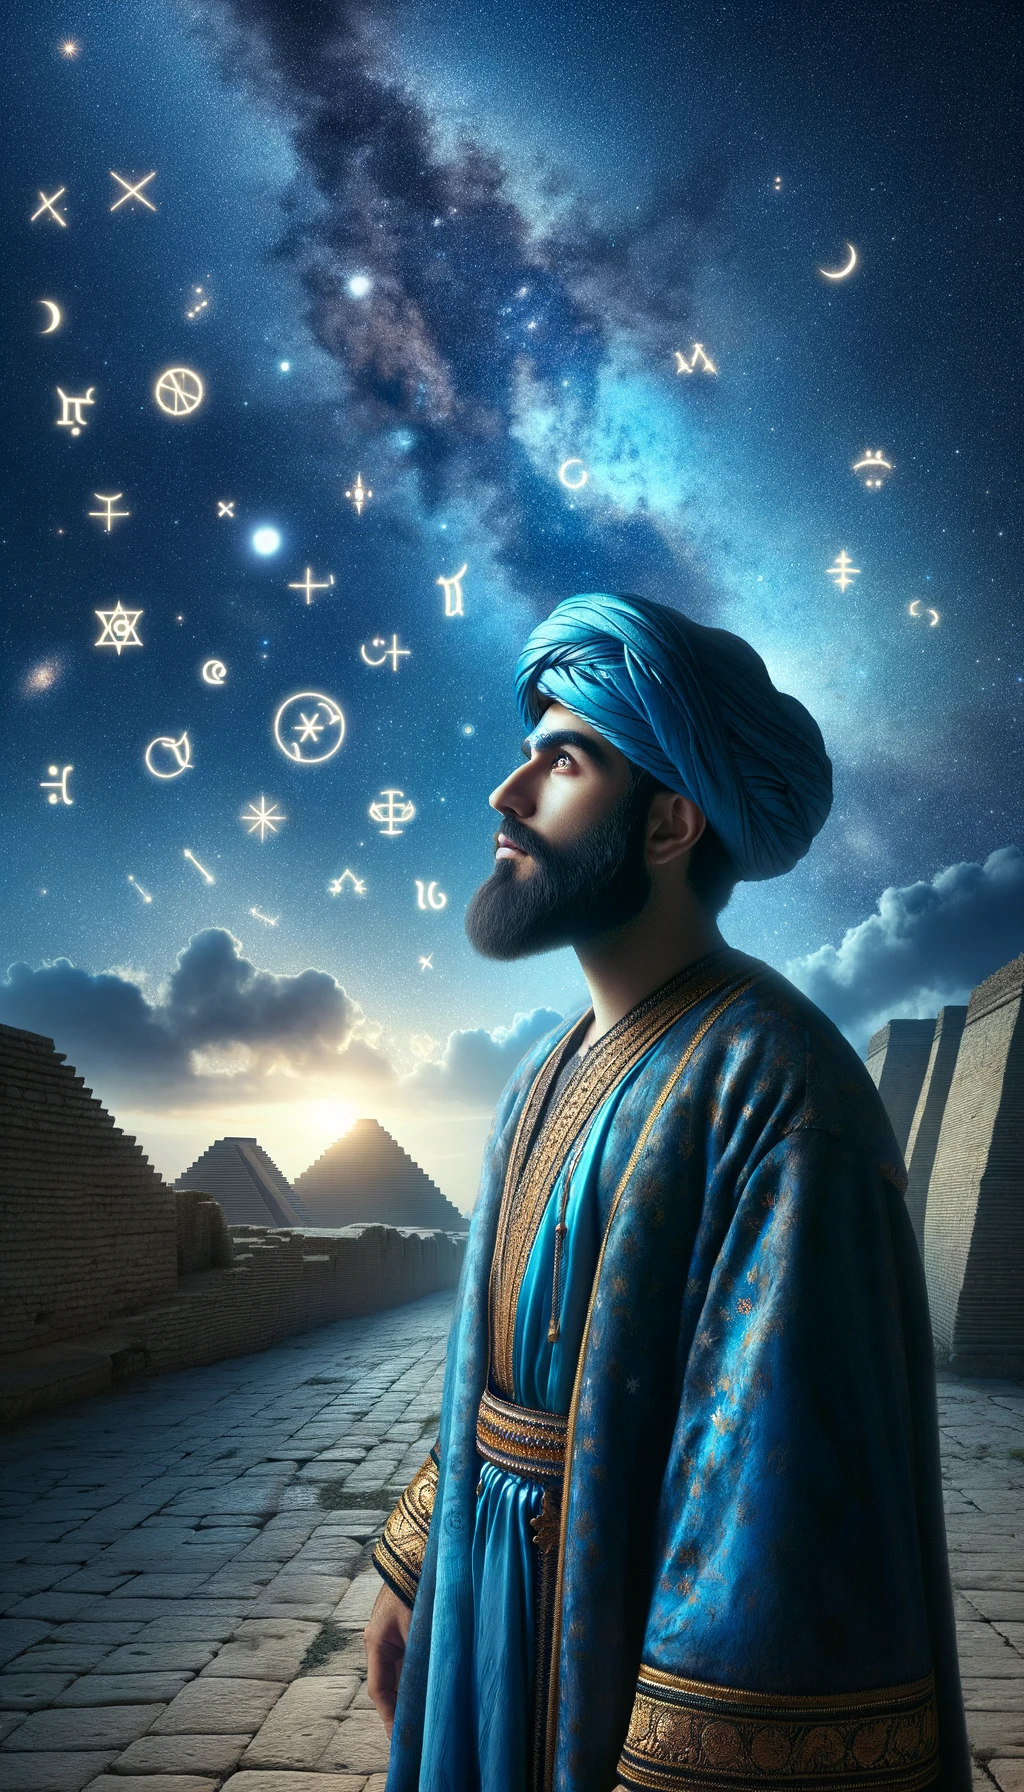 Chaldean astrologer looking at the stars